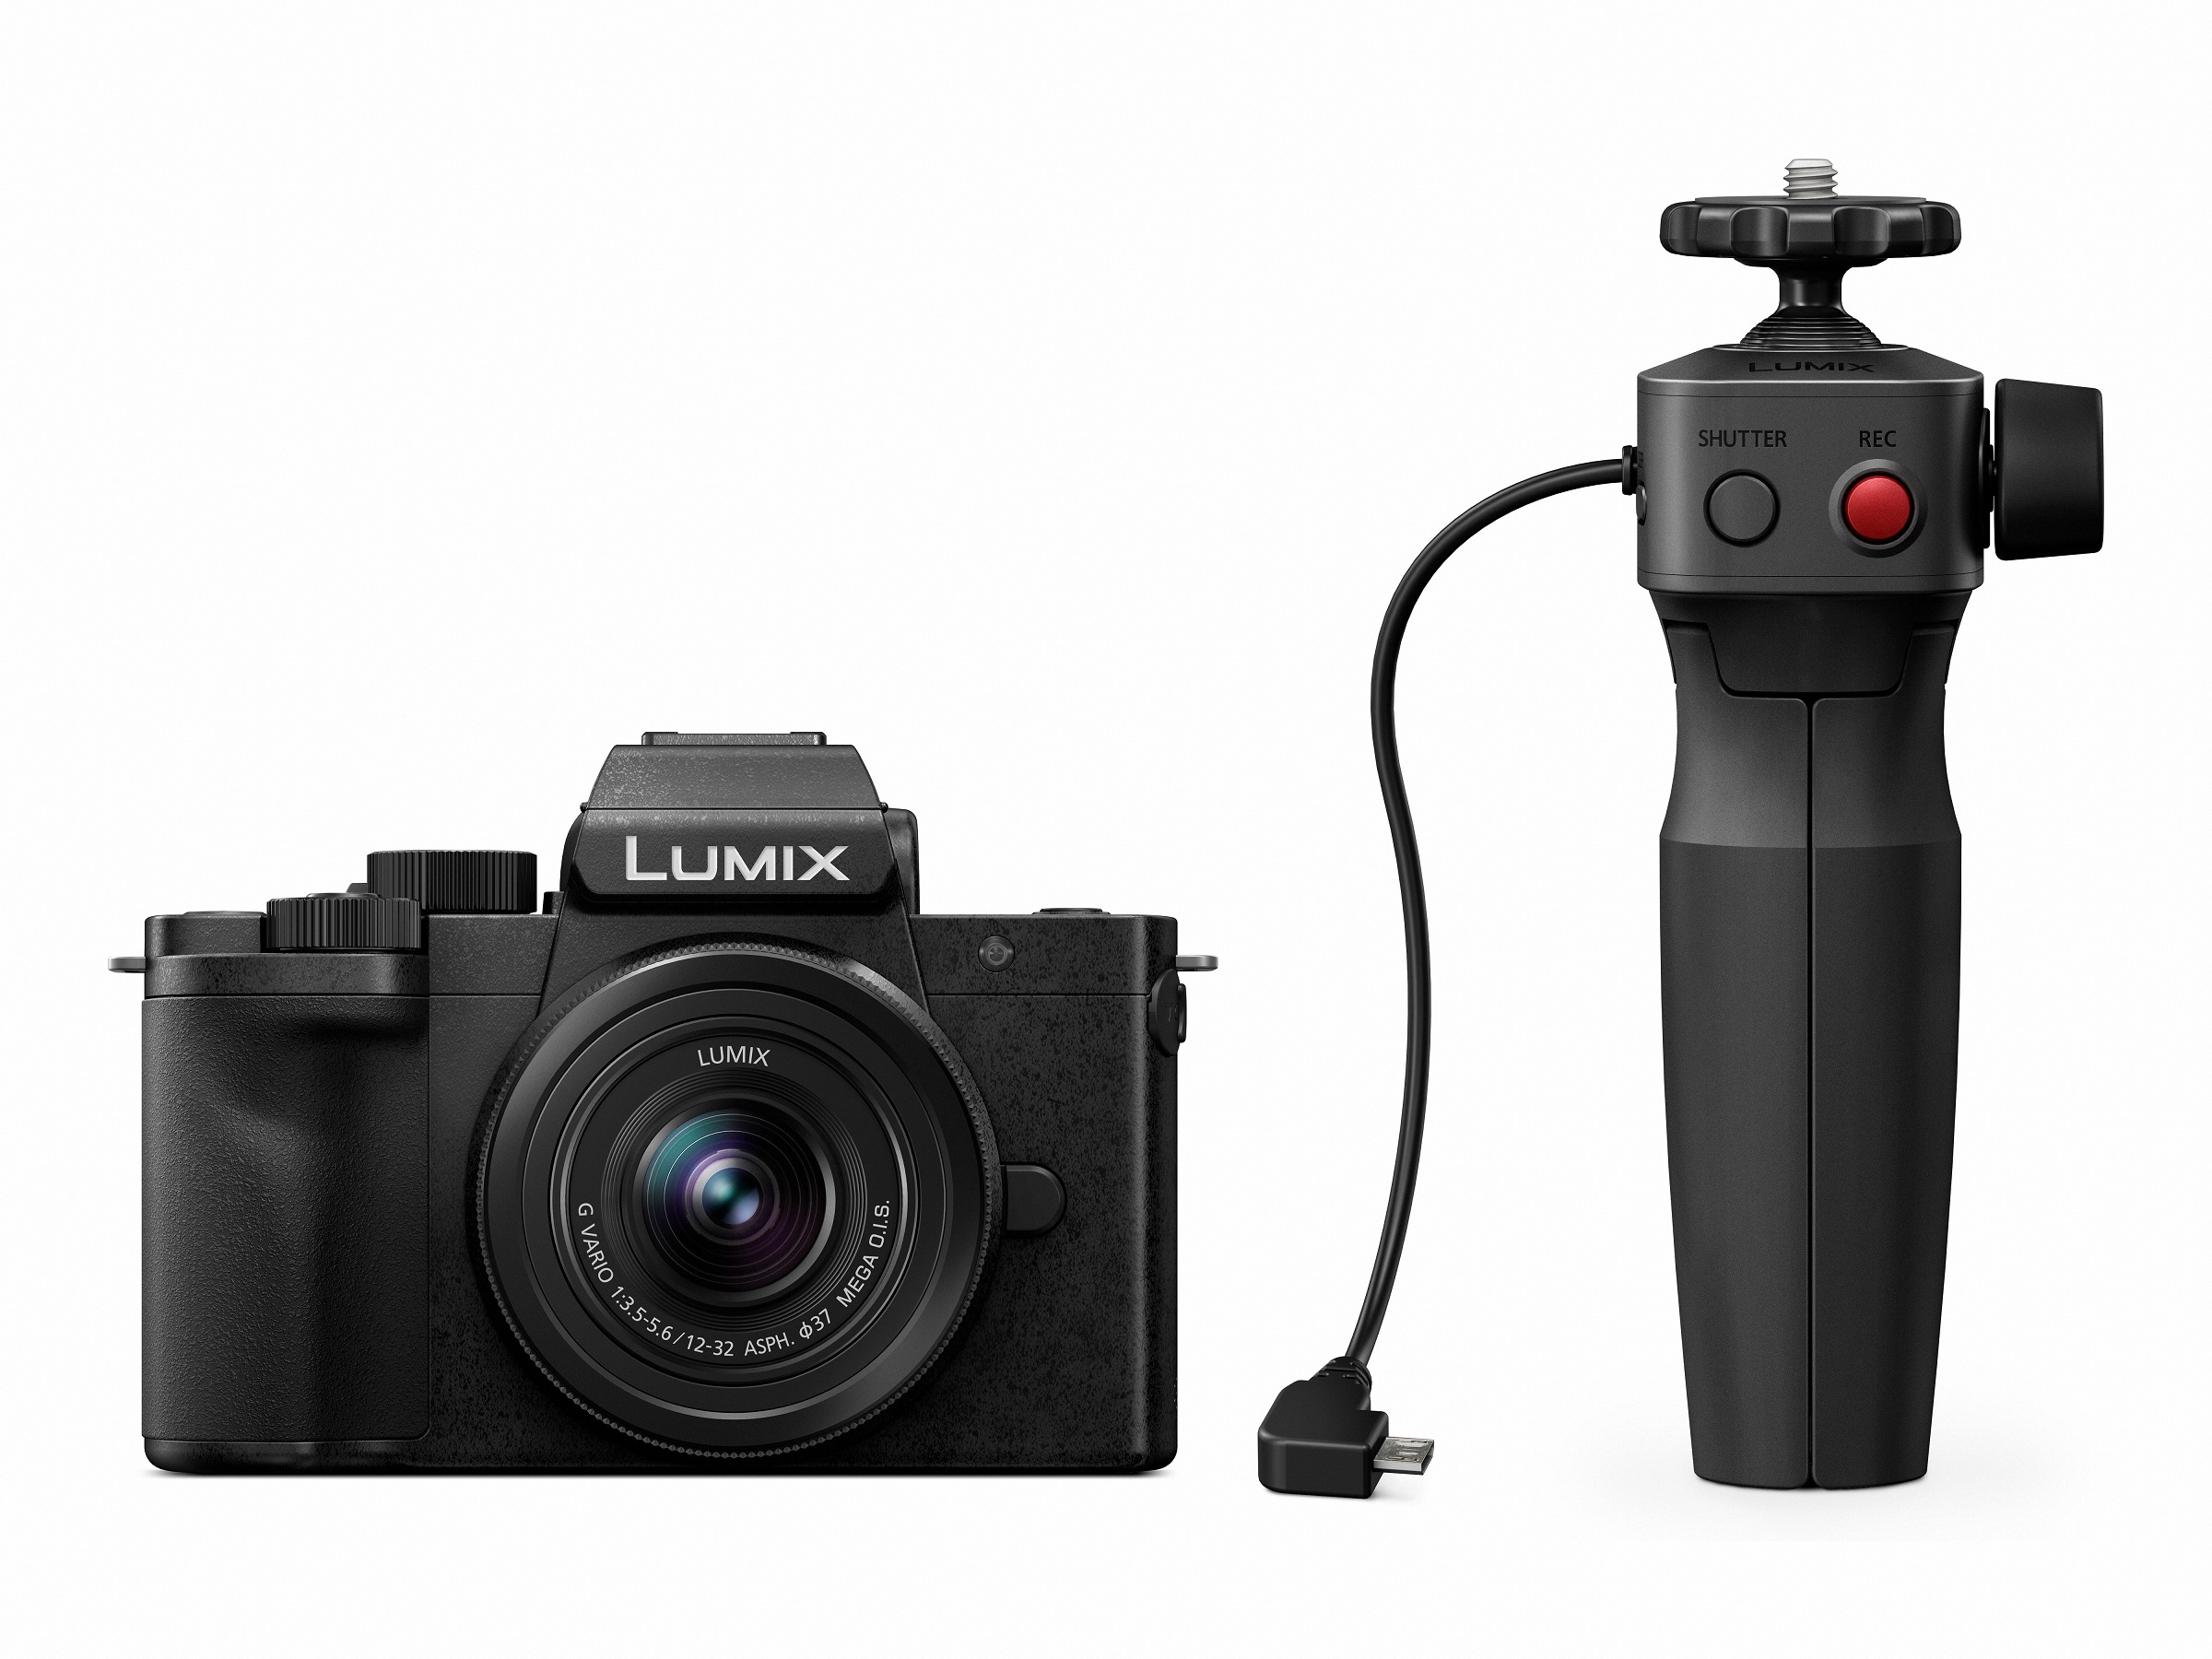 Image for Panasonic Introduces LUMIX G100, The Best Mirrorless Camera Ever For Vlogging And Creative Video Content Featuring High Sound And Image Quality